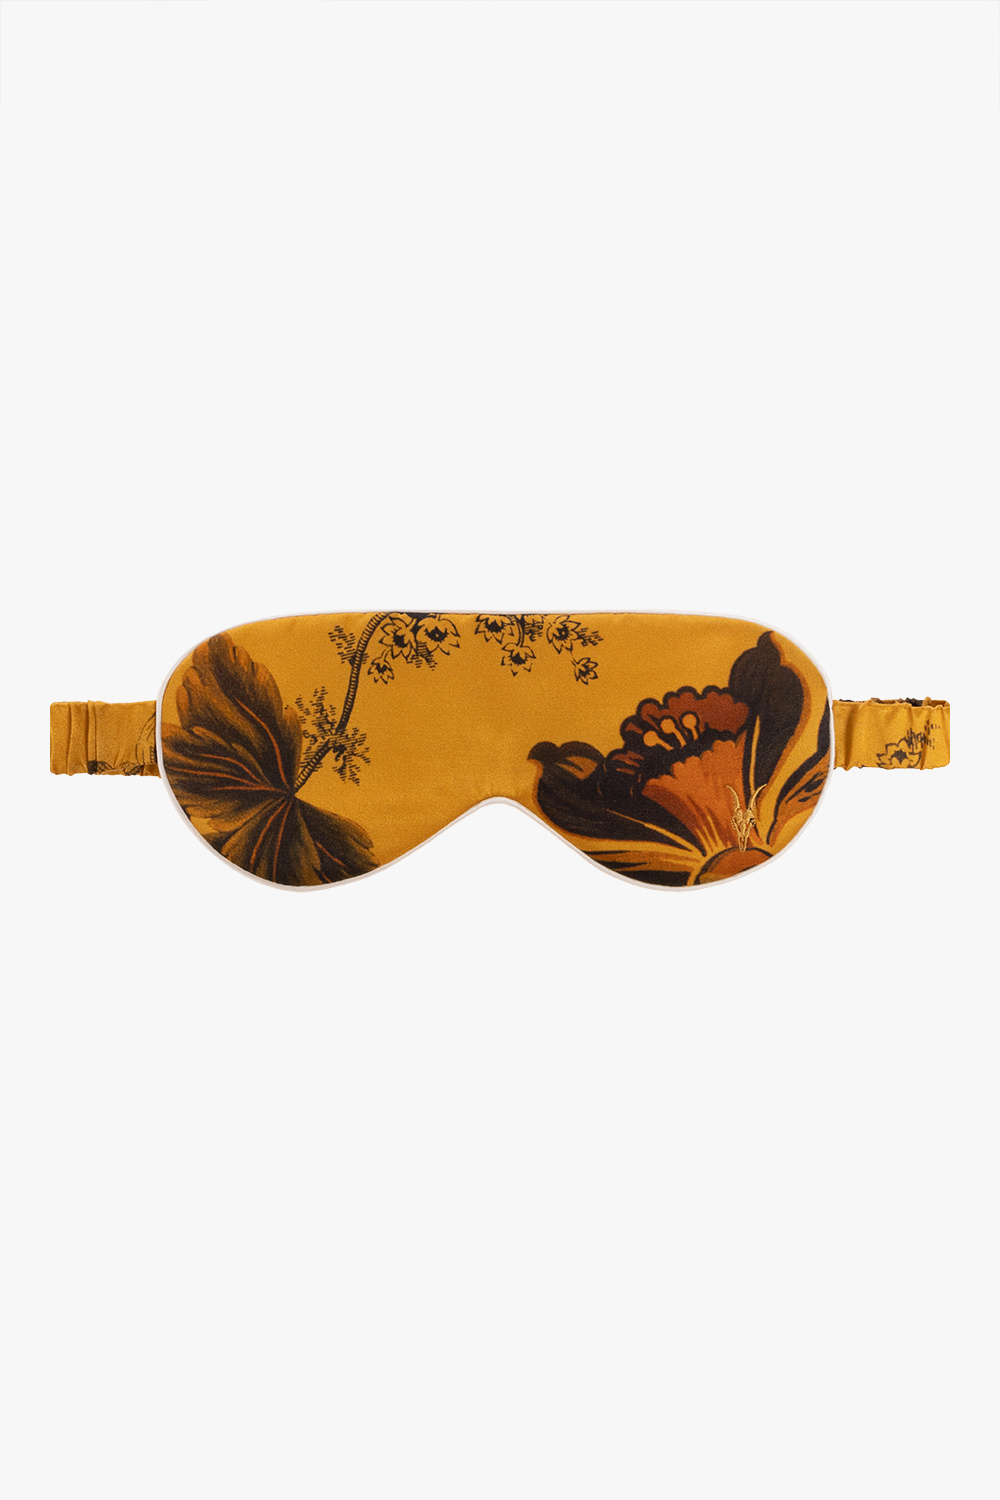 AllSaints ‘Lilly’ sleeping mask